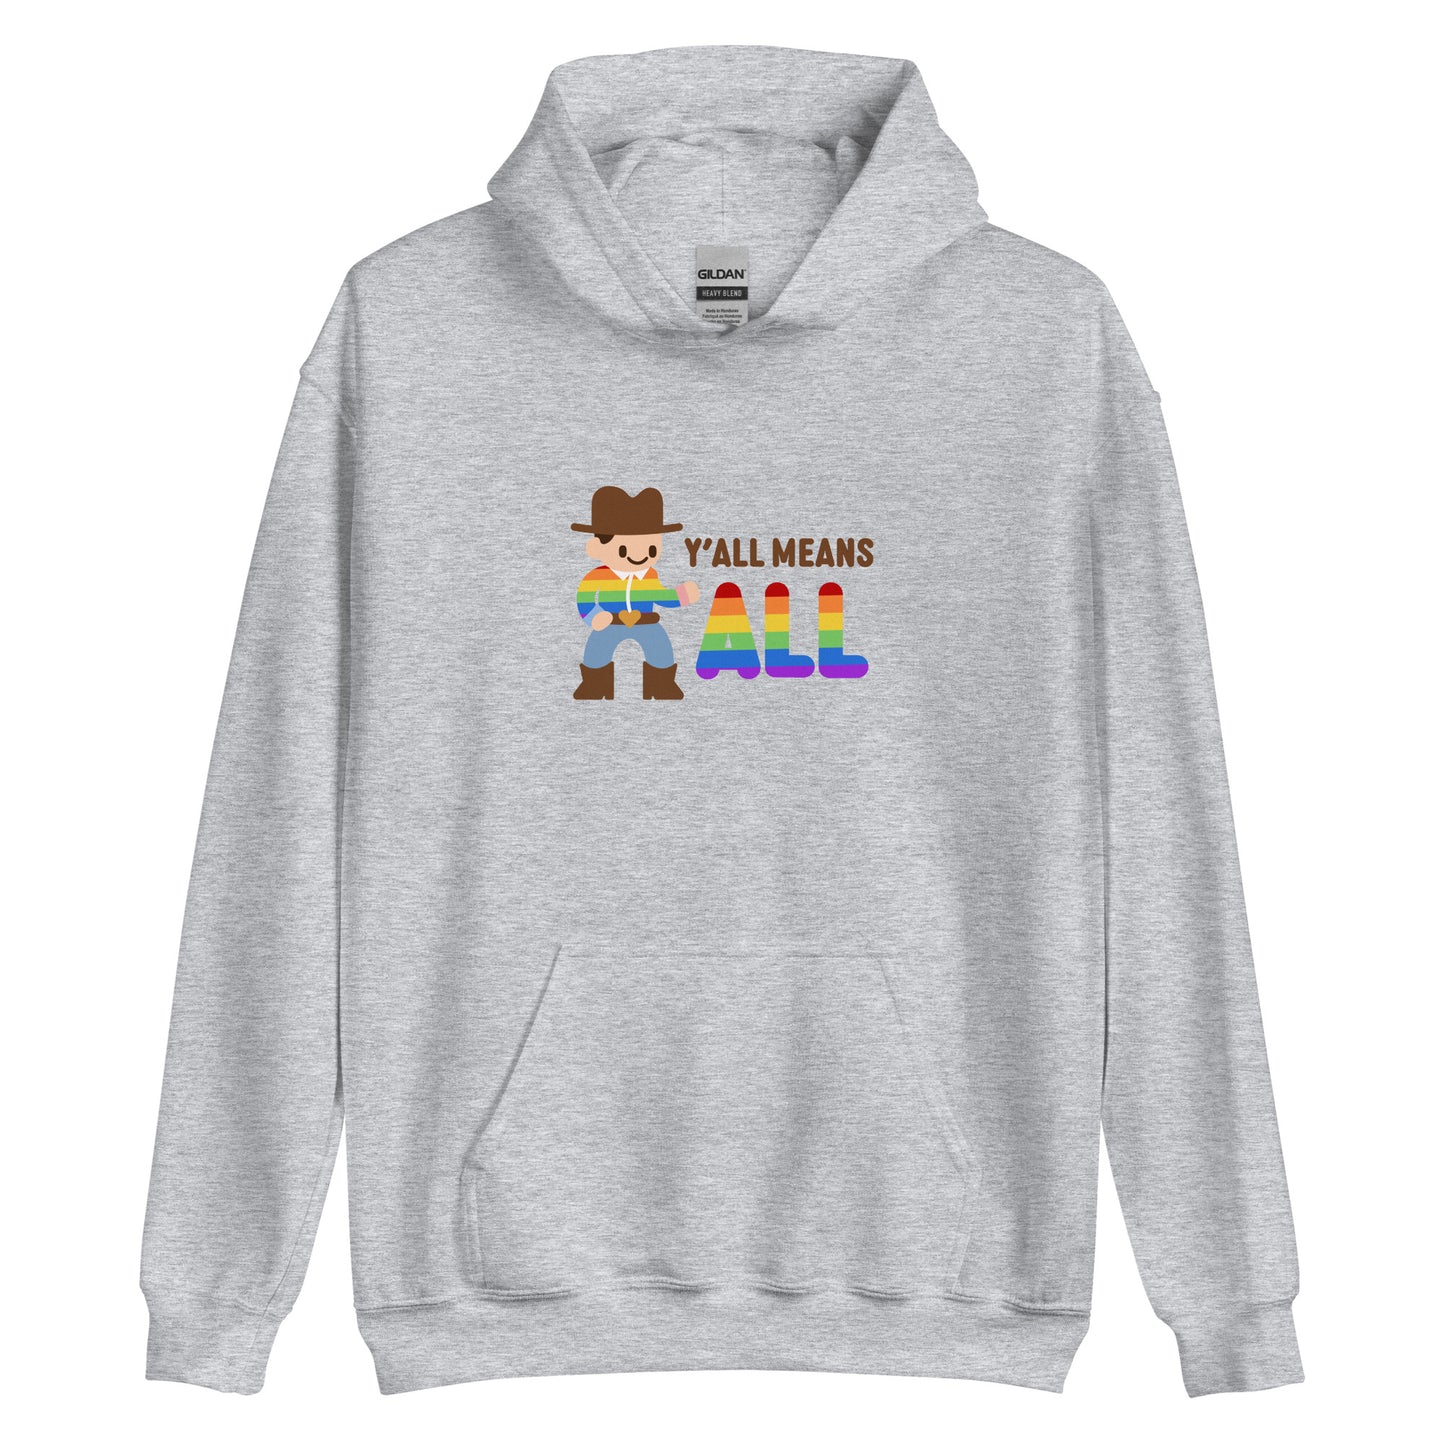 A grey hooded sweatshirt featuring an illustration of a smiling cowboy wearing a rainbow striped shirt. Text alongside the cowboy reads "Y'all means ALL". The word "ALL" is rainbow-colored to match the cowboy's shirt.